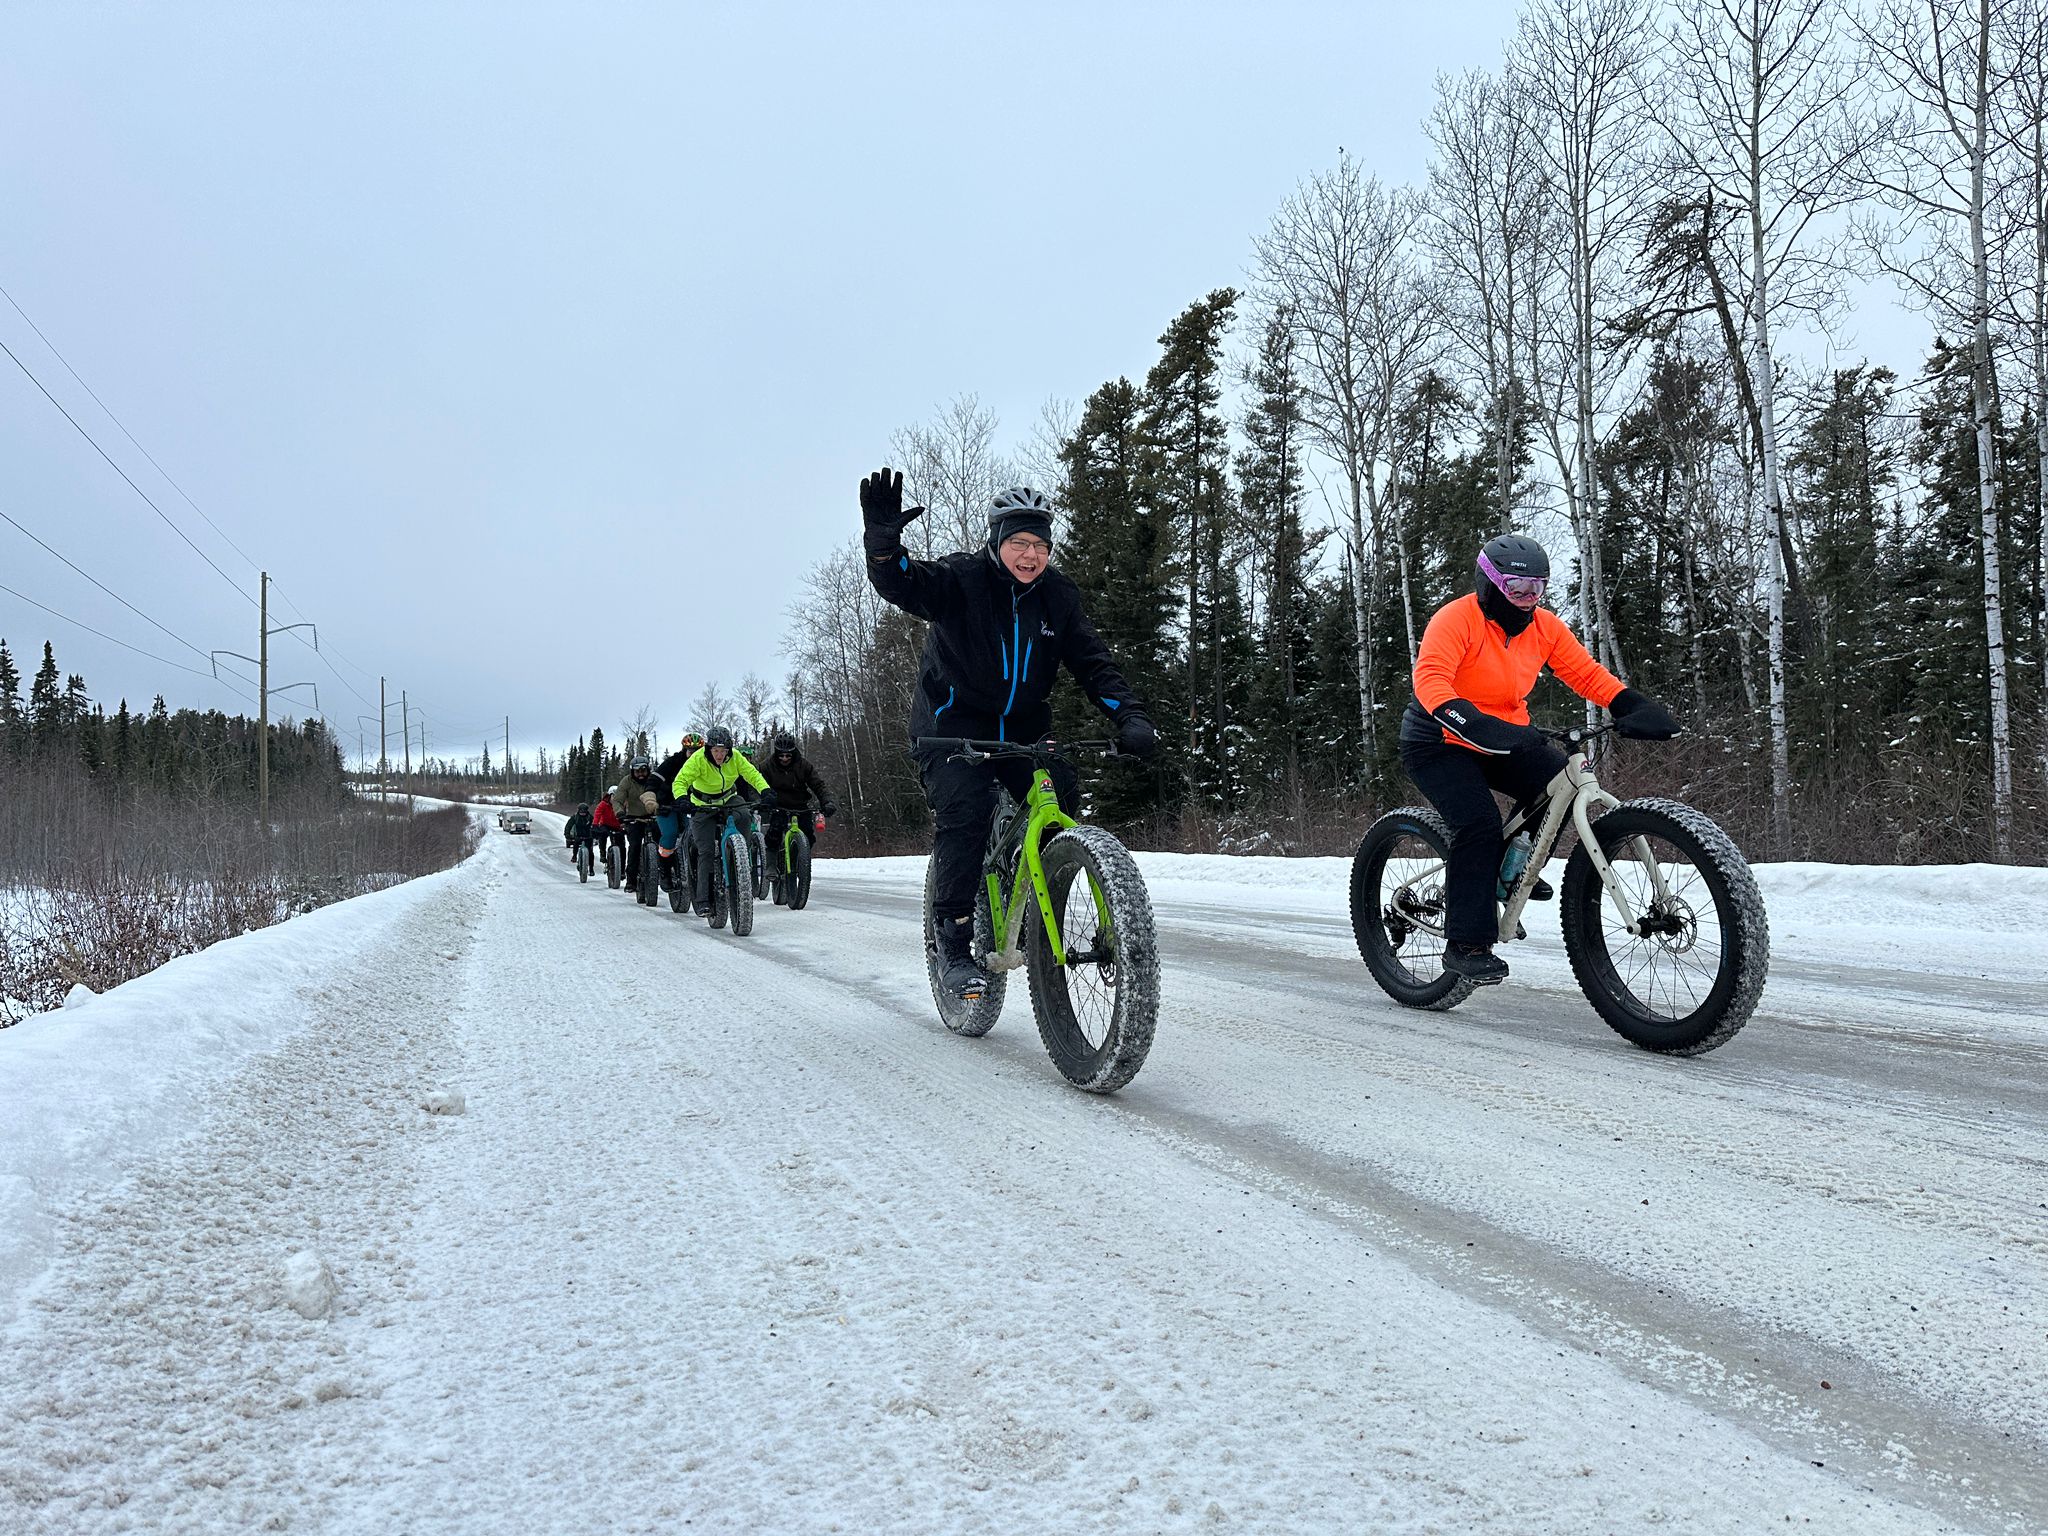 Bike riders on fat bikes waving at the camera on a snowy trail in the forest.